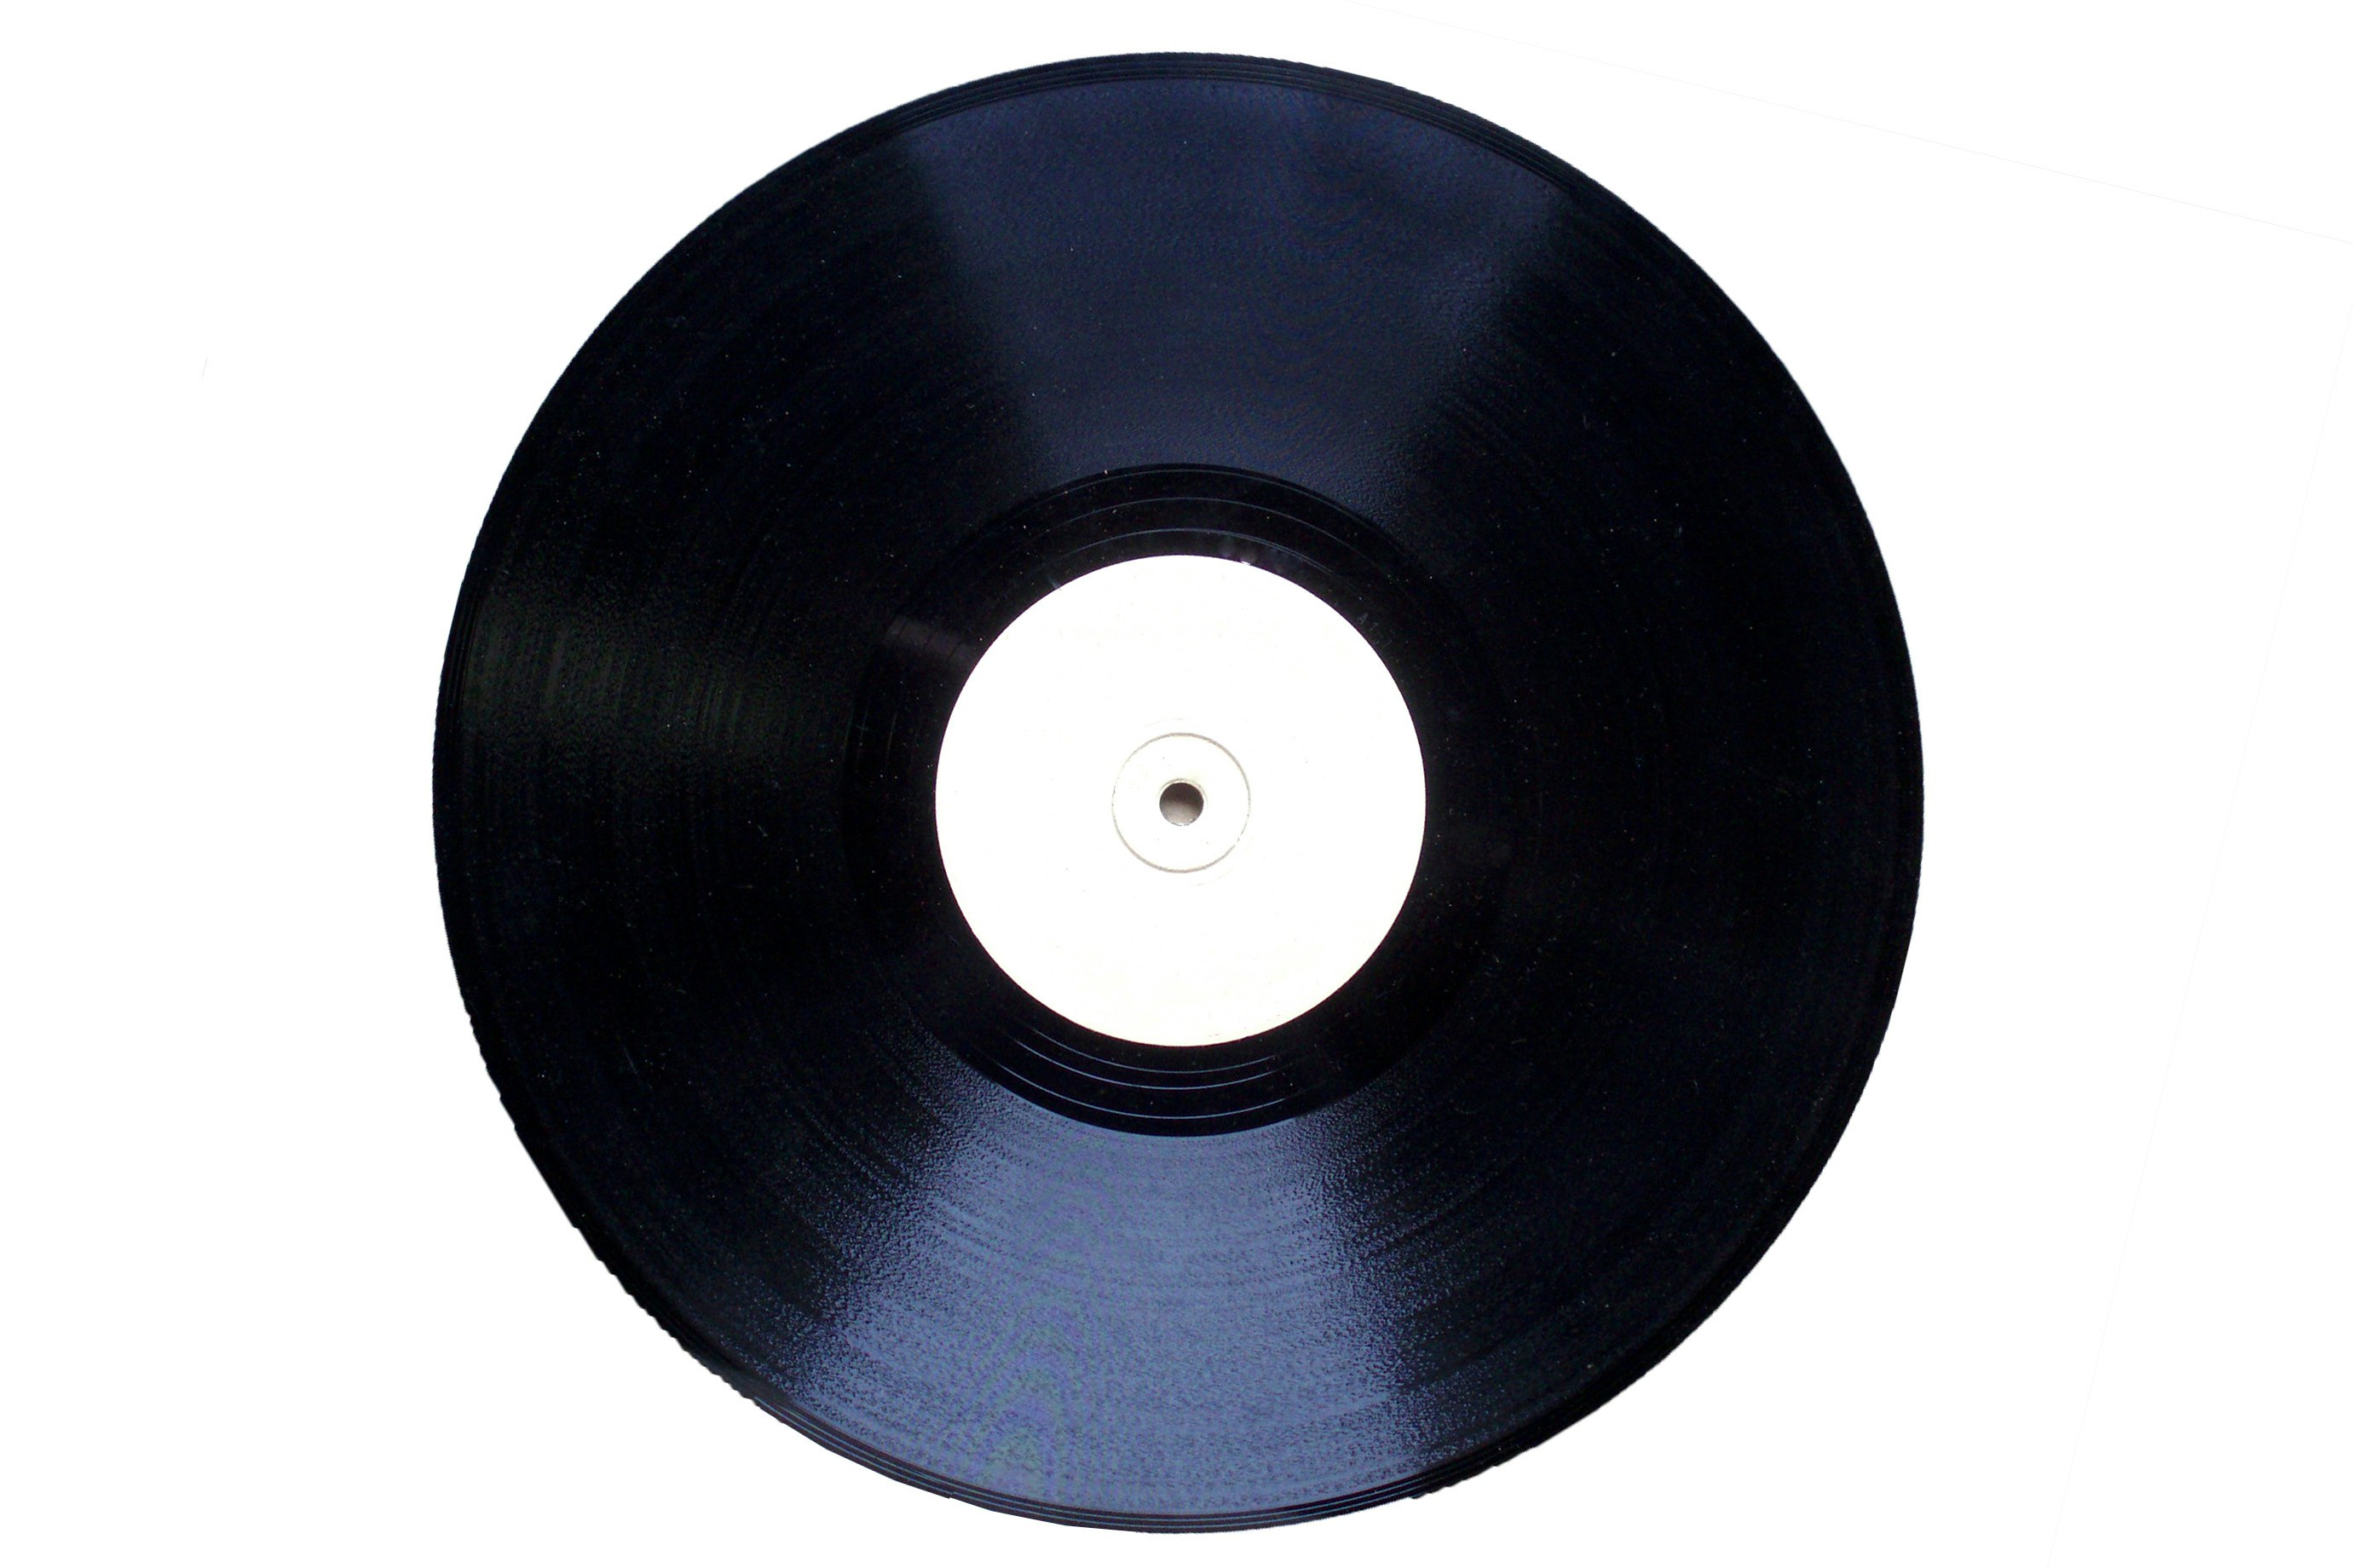 A blank record on a white surface.